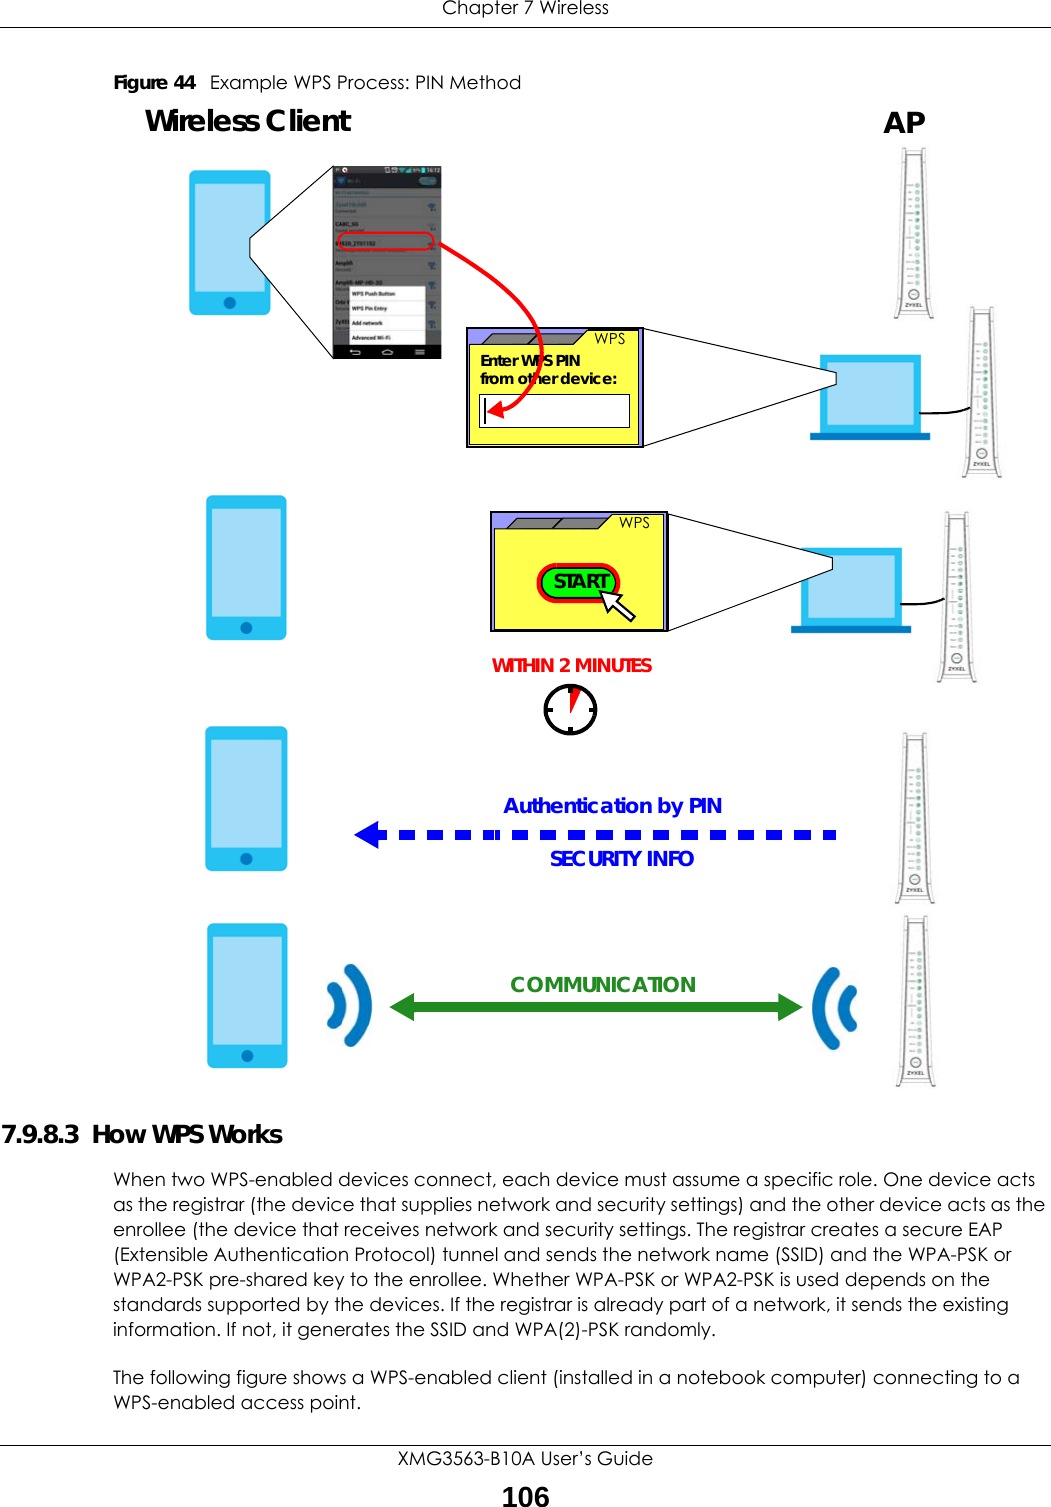 Chapter 7 WirelessXMG3563-B10A User’s Guide106Figure 44   Example WPS Process: PIN Method7.9.8.3  How WPS WorksWhen two WPS-enabled devices connect, each device must assume a specific role. One device acts as the registrar (the device that supplies network and security settings) and the other device acts as the enrollee (the device that receives network and security settings. The registrar creates a secure EAP (Extensible Authentication Protocol) tunnel and sends the network name (SSID) and the WPA-PSK or WPA2-PSK pre-shared key to the enrollee. Whether WPA-PSK or WPA2-PSK is used depends on the standards supported by the devices. If the registrar is already part of a network, it sends the existing information. If not, it generates the SSID and WPA(2)-PSK randomly.The following figure shows a WPS-enabled client (installed in a notebook computer) connecting to a WPS-enabled access point.SECURITY INFOWITHIN 2 MINUTESEnter WPS PIN  WPSfrom other device: WPSSTARTWireless Client APAuthentication by PINCOMMUNICATION